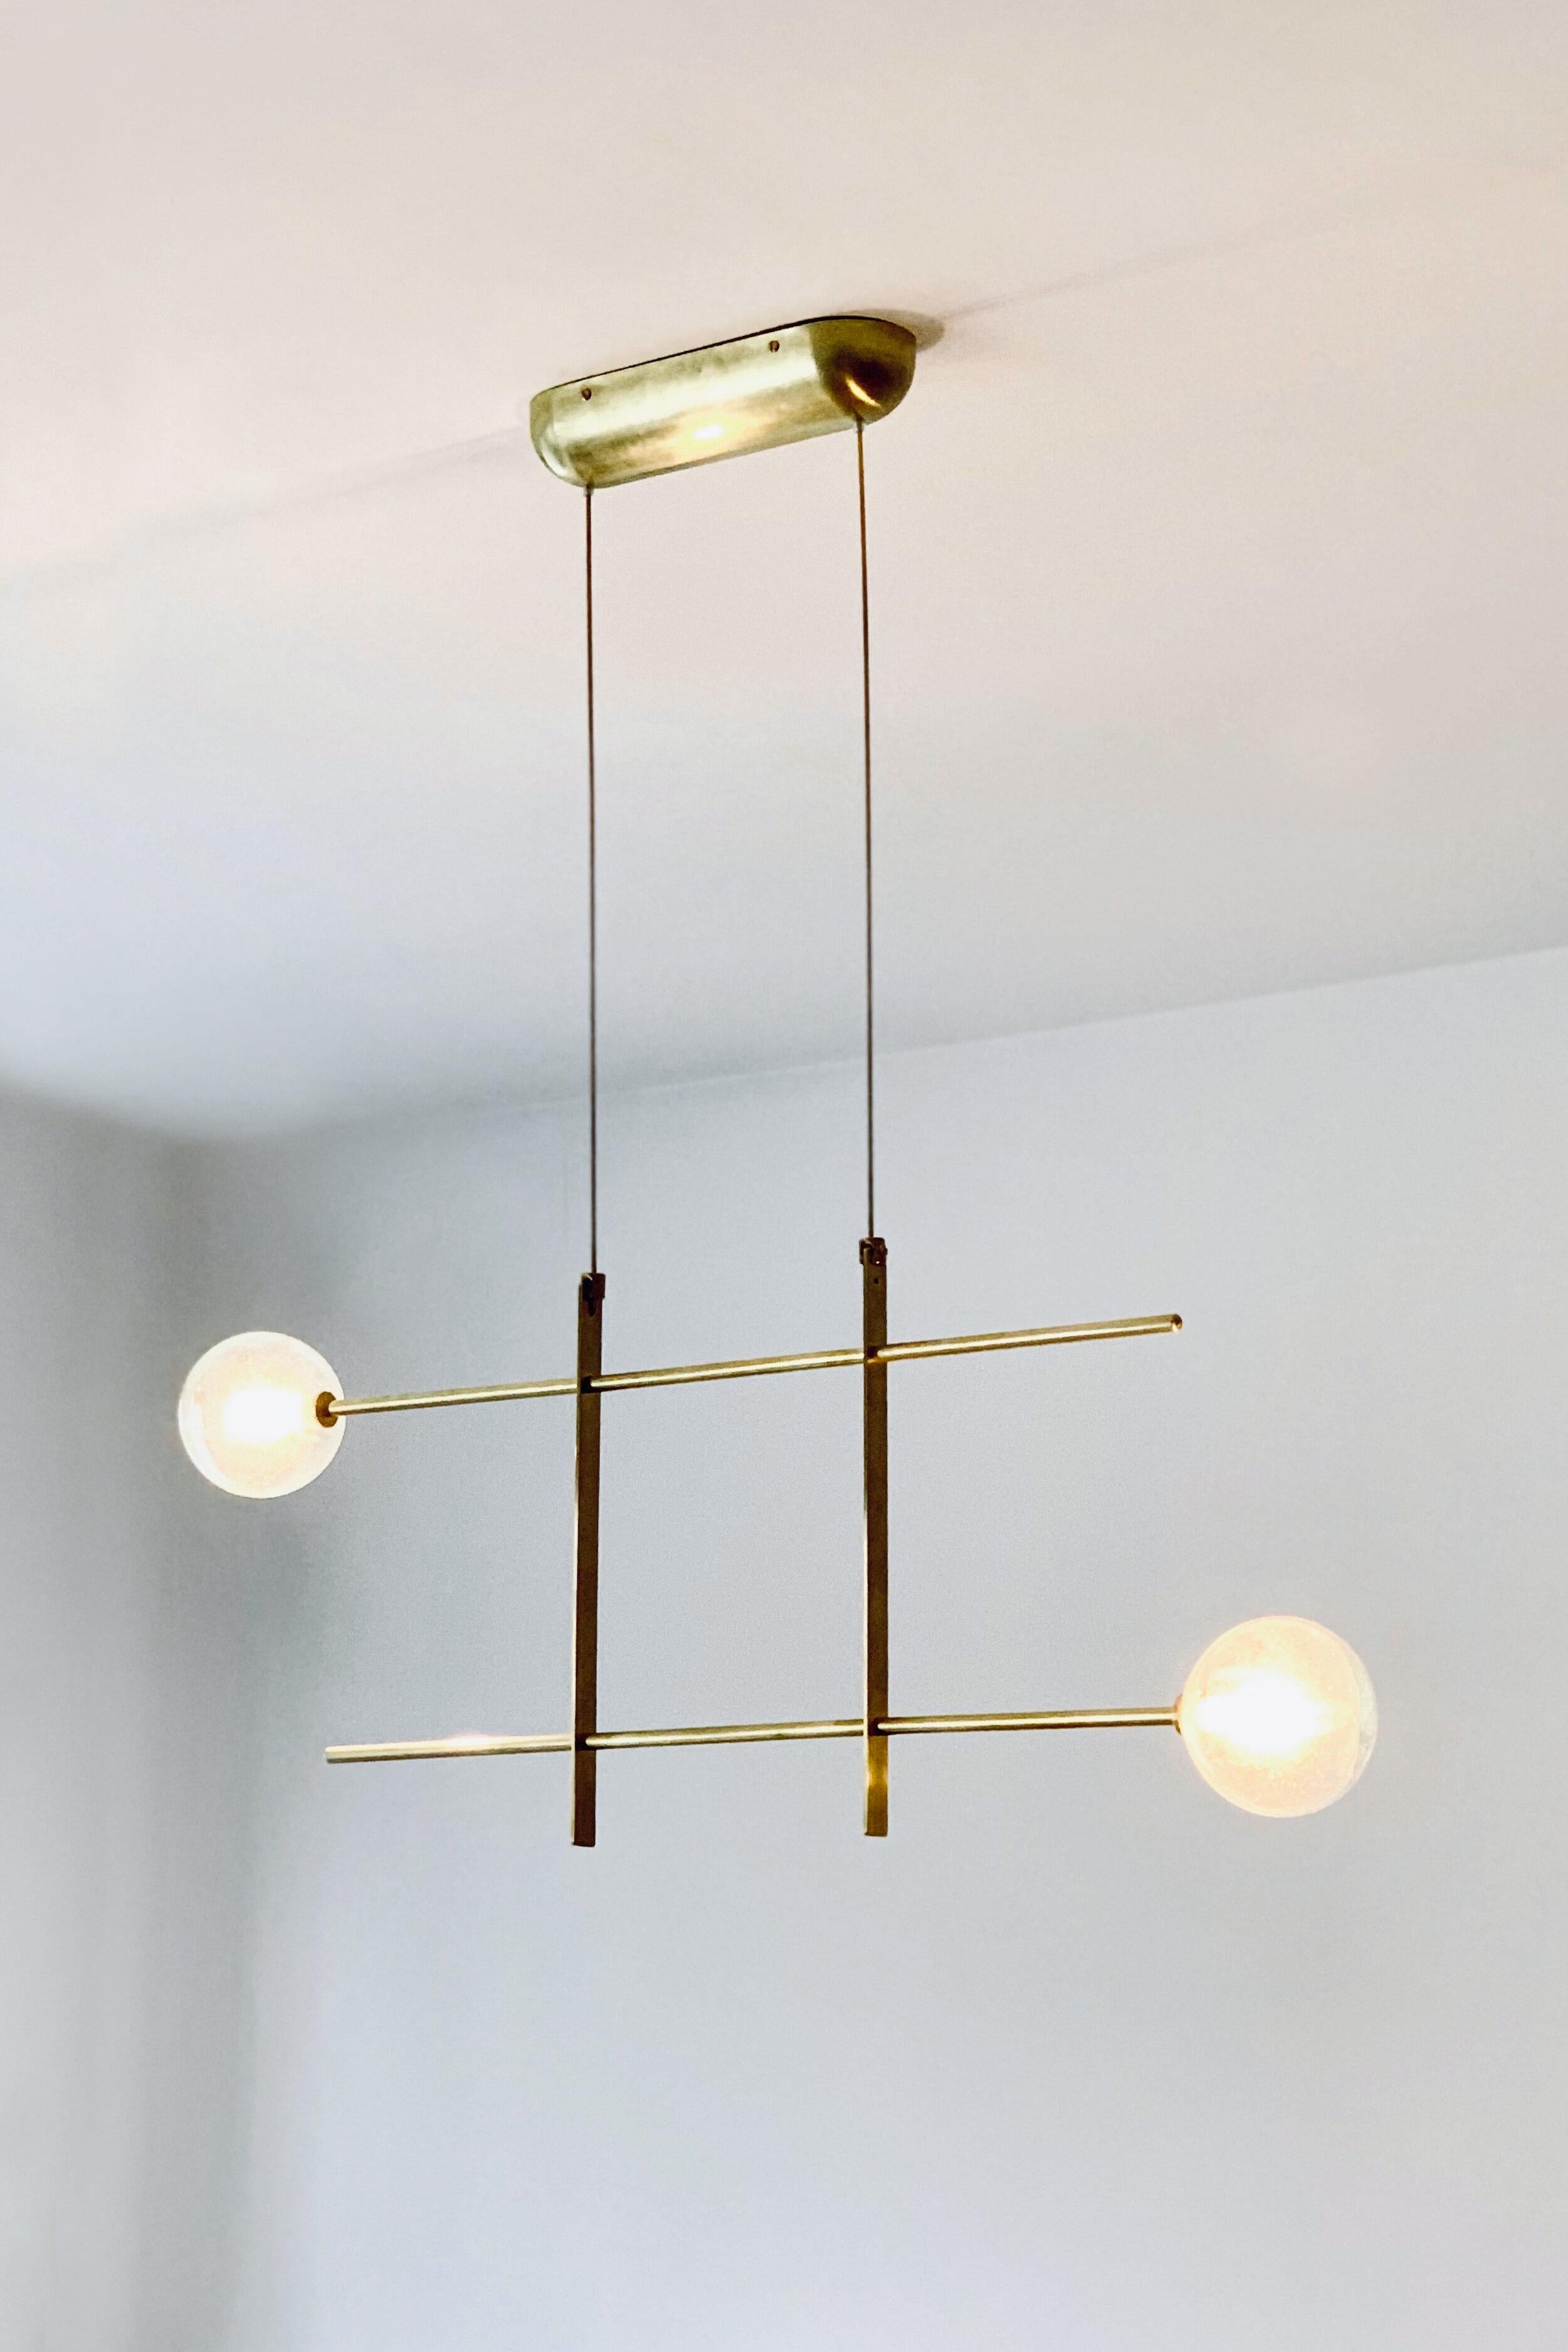 Modular chandelier 2 lamps by Contain
Dimensions: D 80 x W 32 x H 100 cm (custom length).
Materials: Brass structure, cristal blown from local production.
Available in different finishes and dimensions.

All our lamps can be wired according to